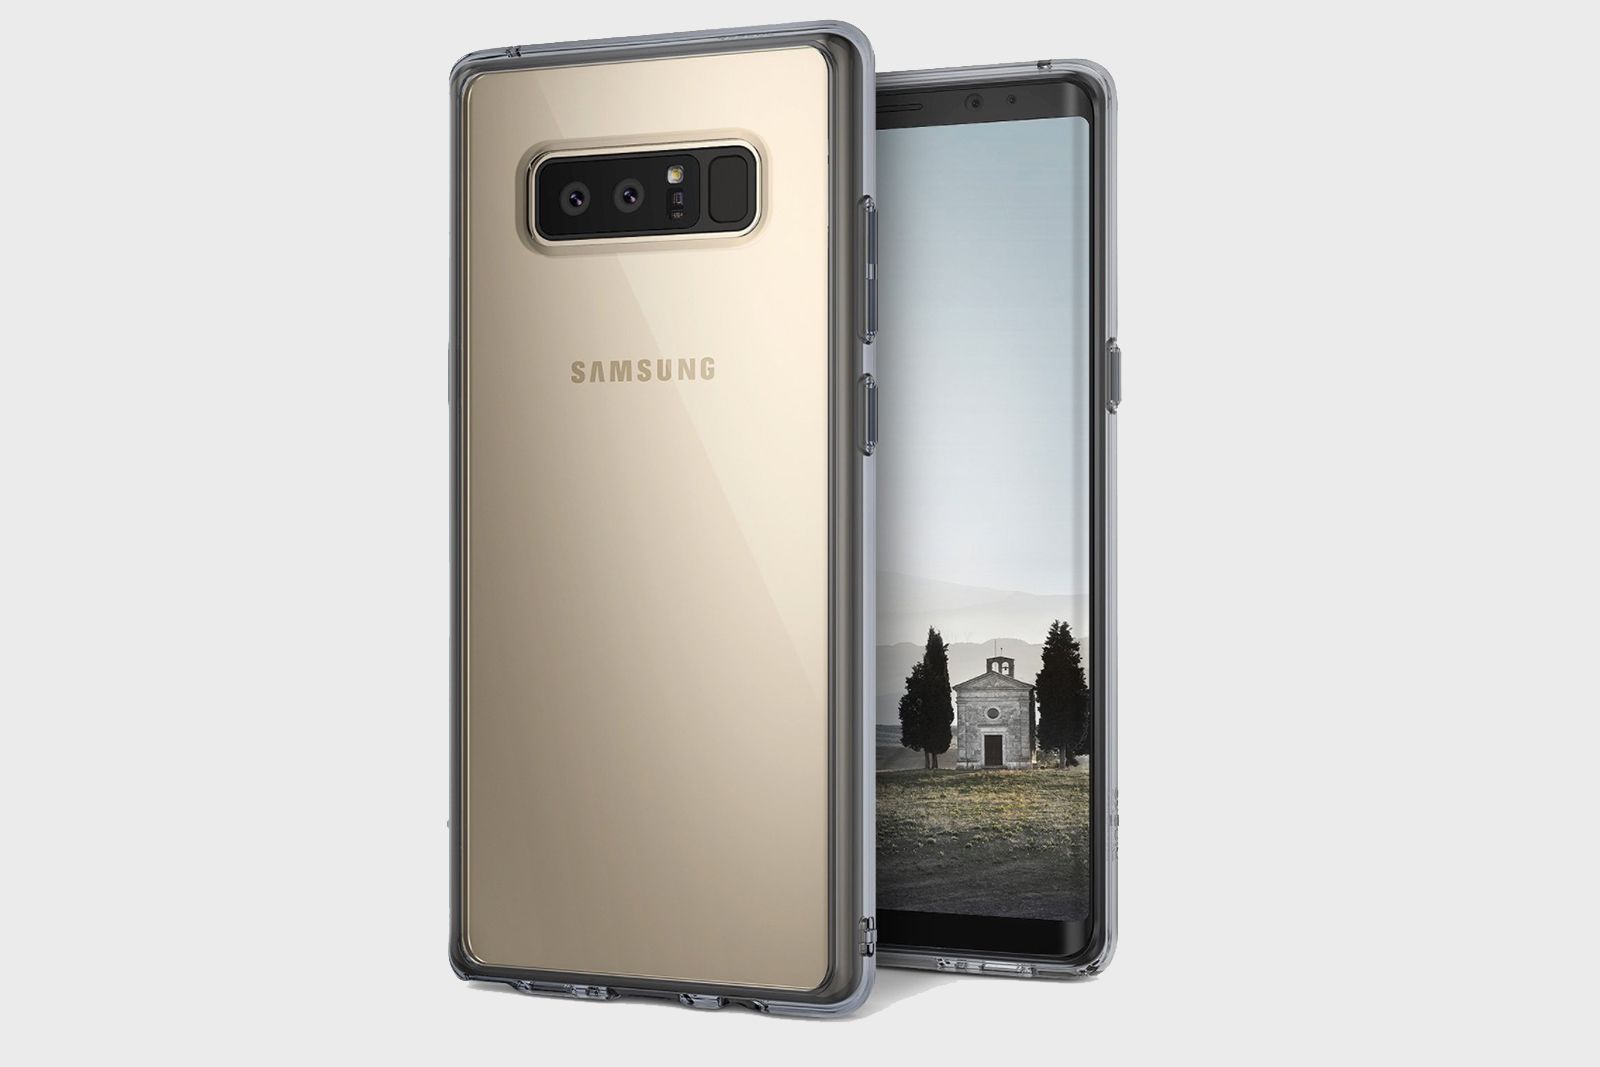 Best Samsung Galaxy Note 8 cases Protect your new 63-inch phablet image 1